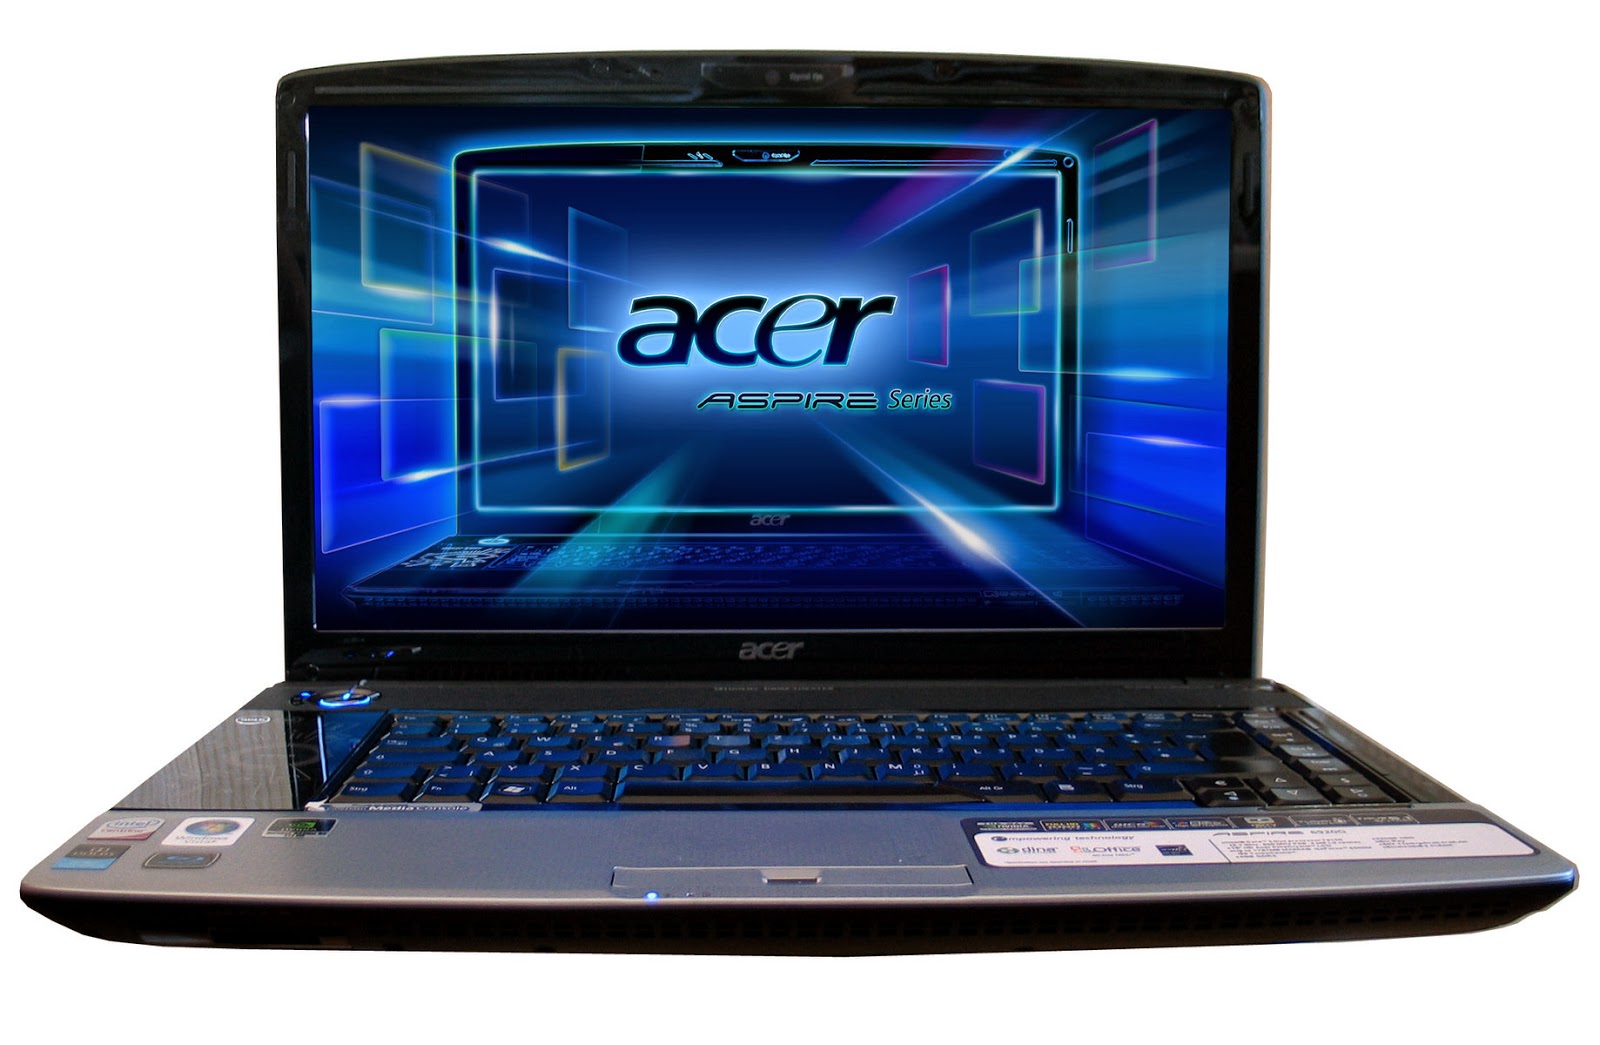 acer windows 7 drivers download